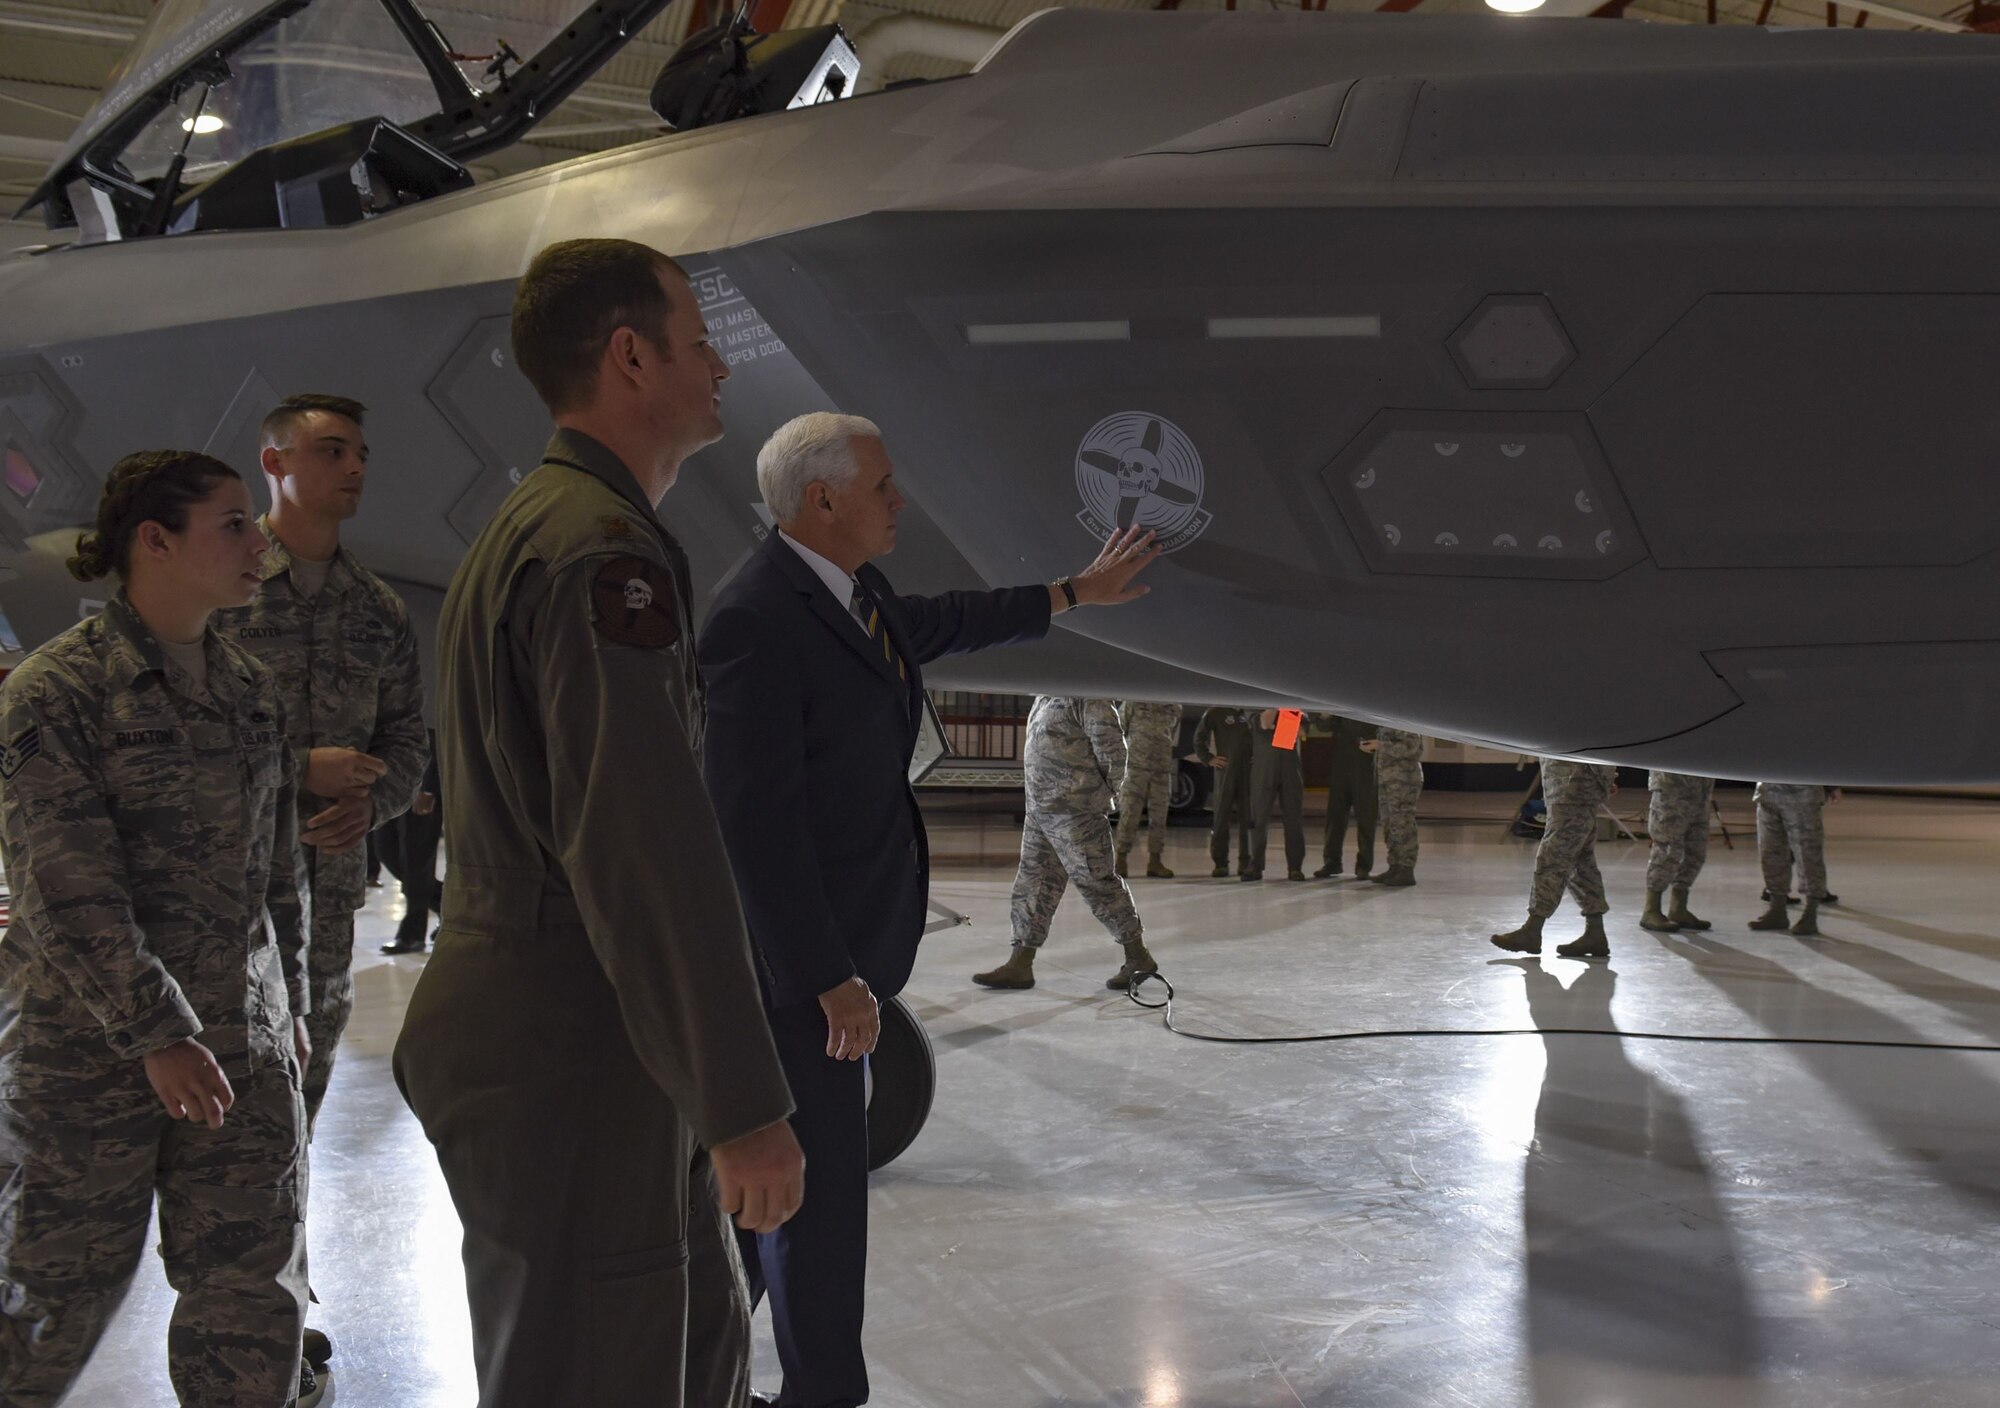 Vice President Mike Pence gets a firsthand look at the F-35 Lightning II fighter jet in the Thunderbirds Hangar at Nellis Air Force Base, Nevada, Jan. 11, 2018.  Nellis AFB provides the tools and tactical training to prepare today’s Airmen to react within seconds during real world operations and meet the need for air superiority. (U.S. Air Force photo by Airman 1st Class Andrew Sarver)